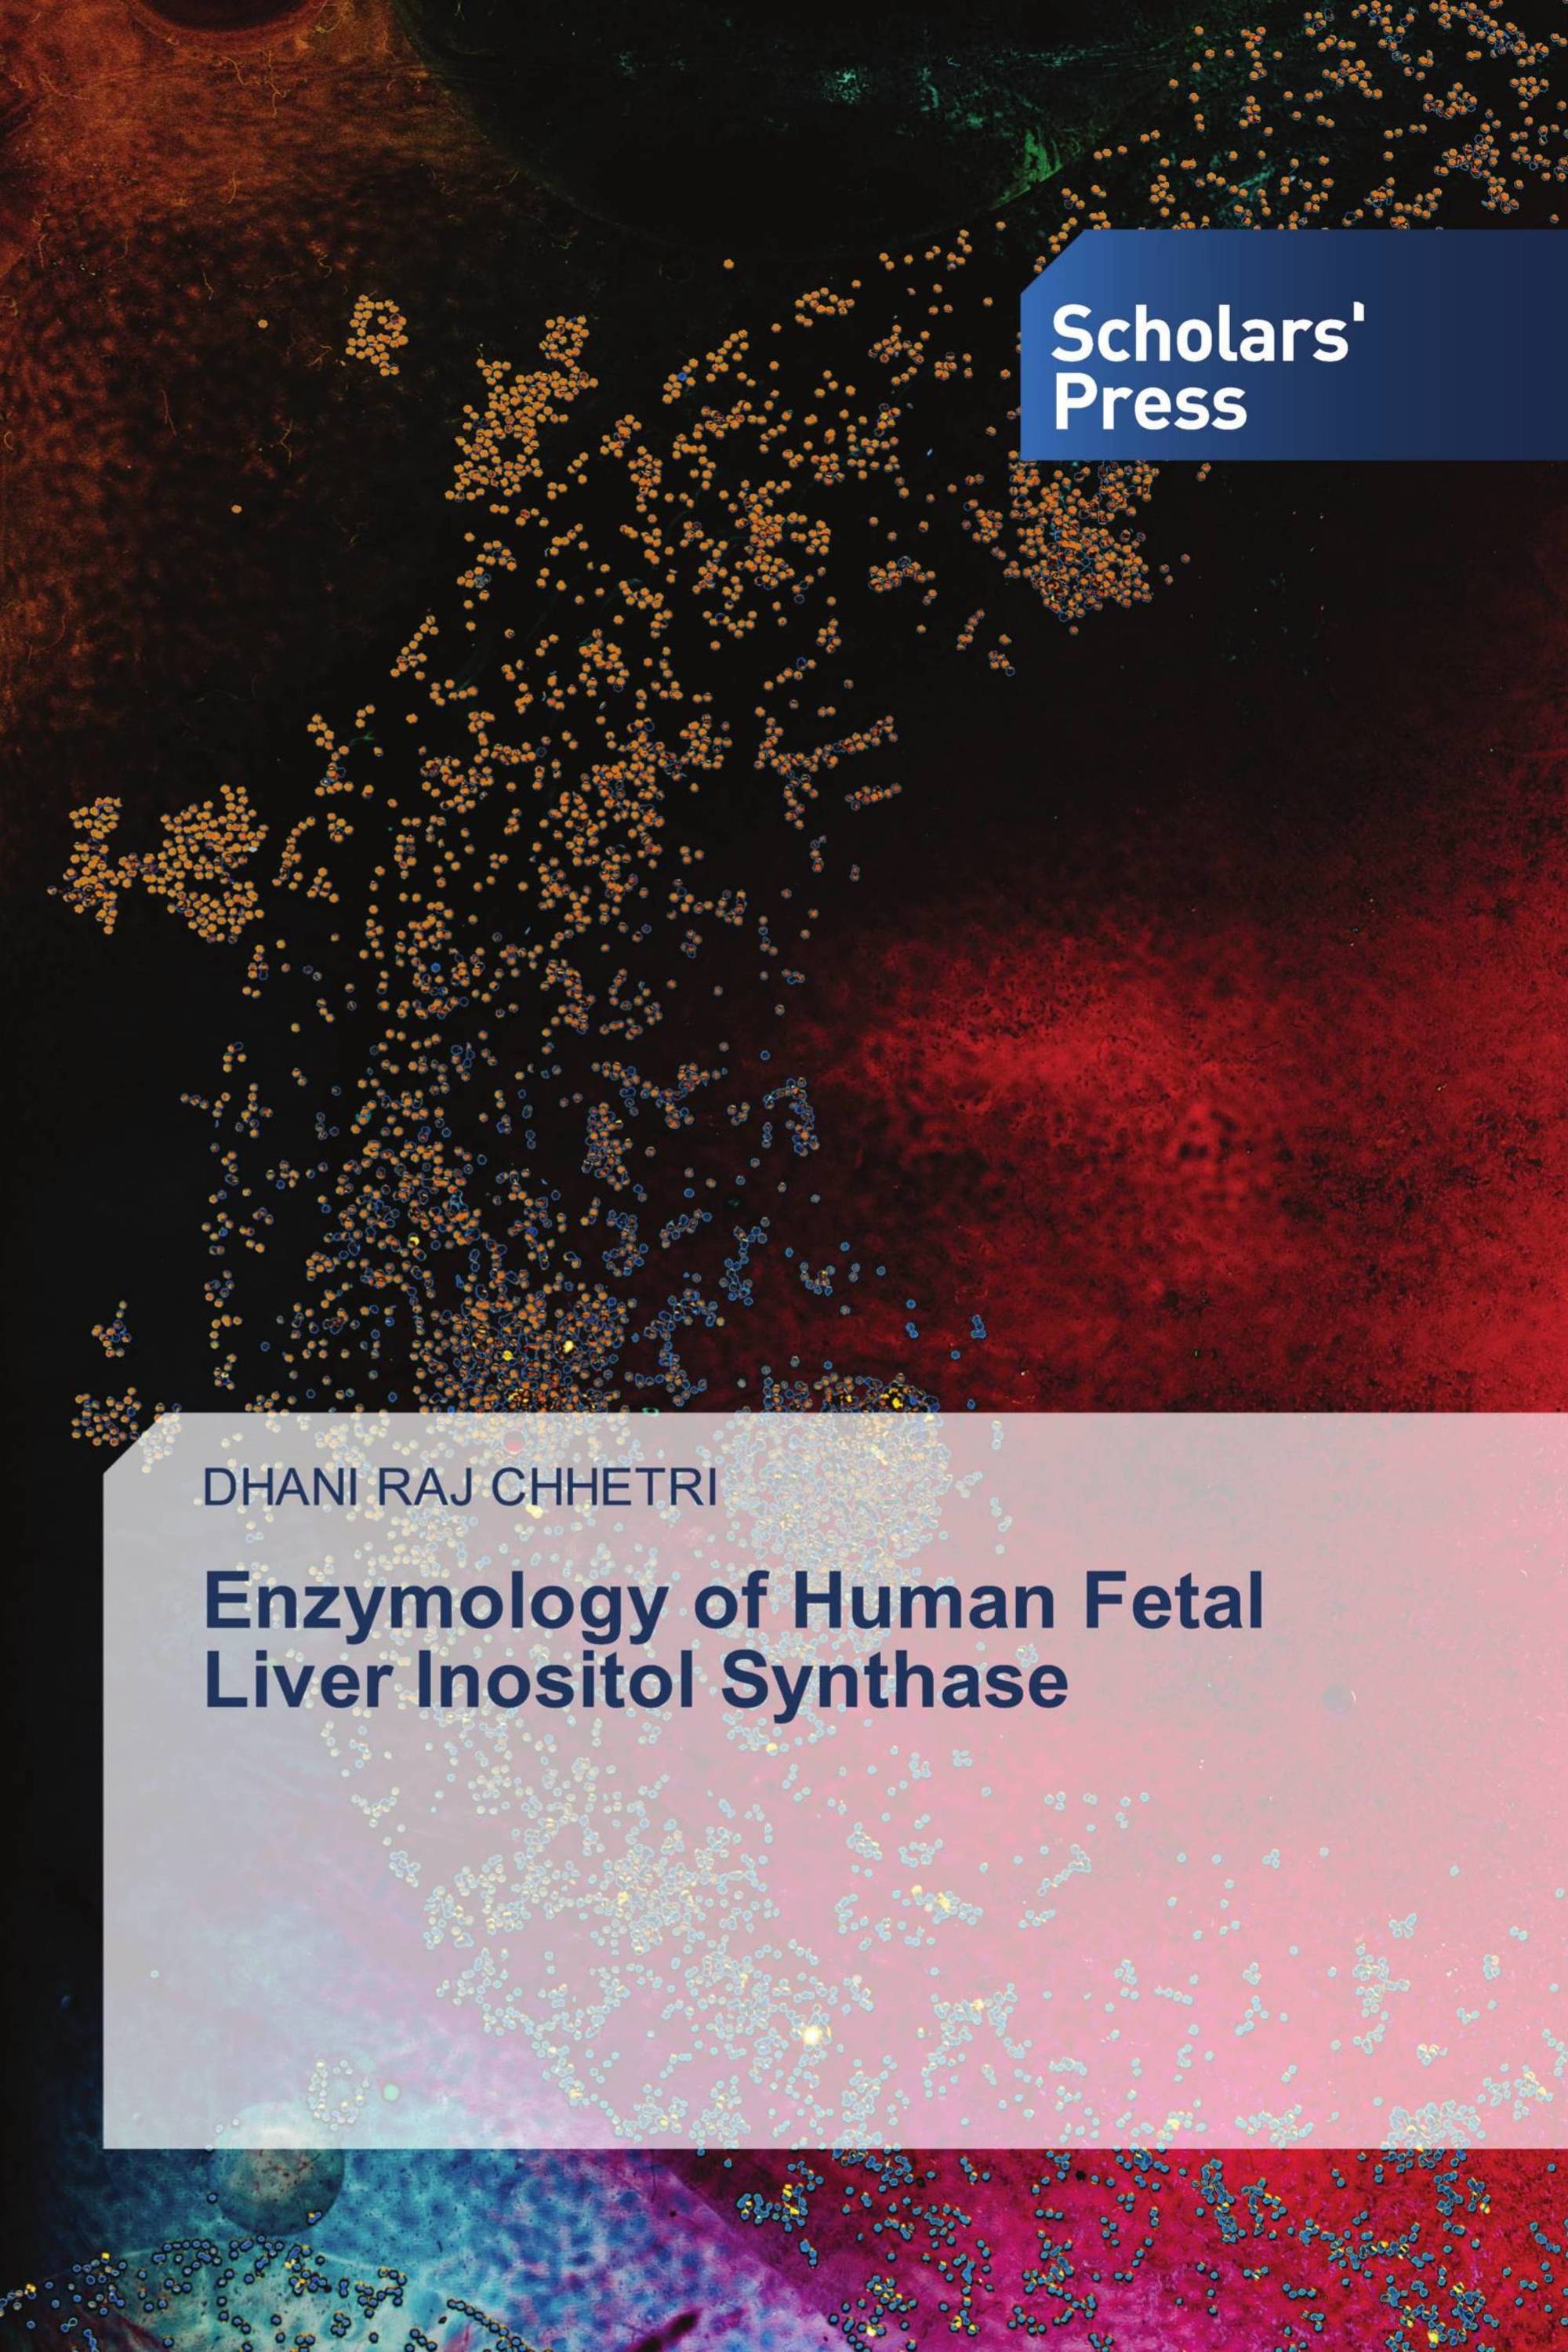 Enzymology of Human Fetal Liver Inositol Synthase